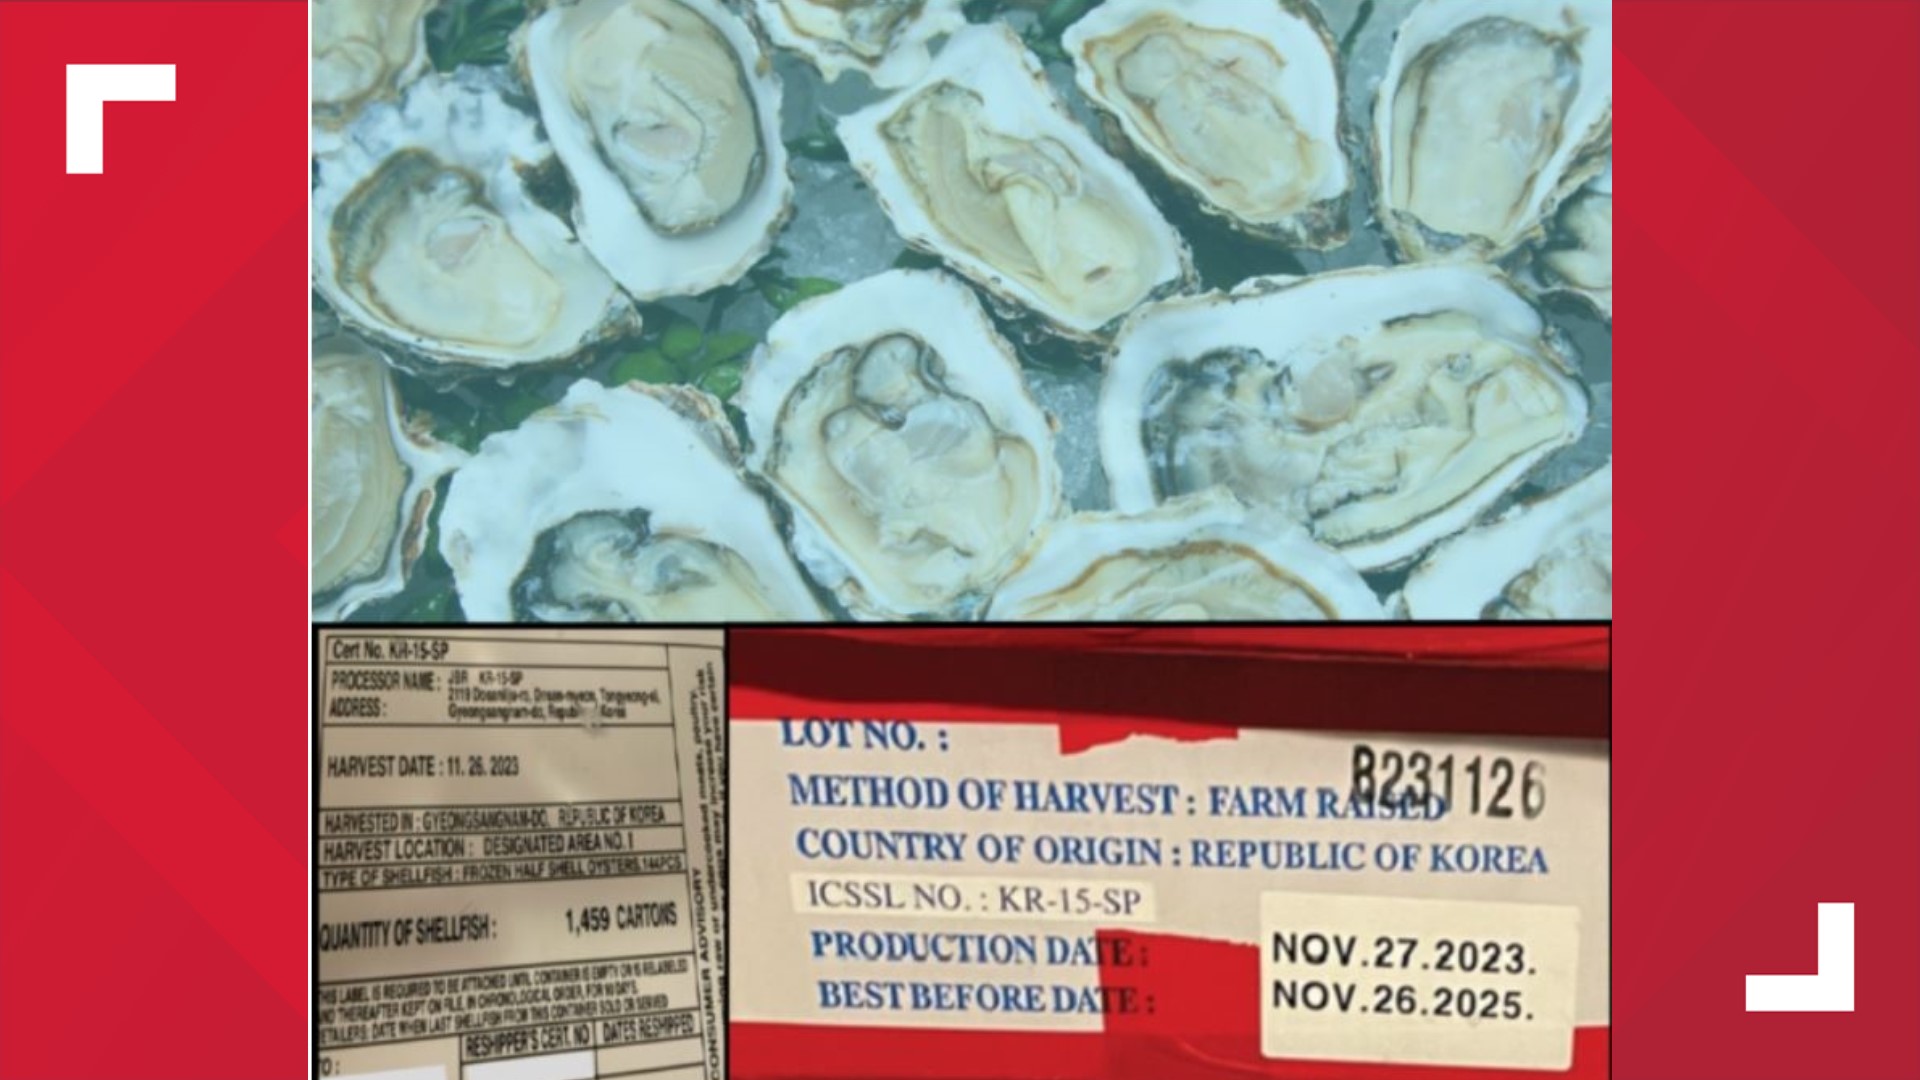 Customers who ate the oysters at 100s Seafood Grill Buffet in Mission Valley between March 31 and April 1 became sick, one person went to the emergency room.